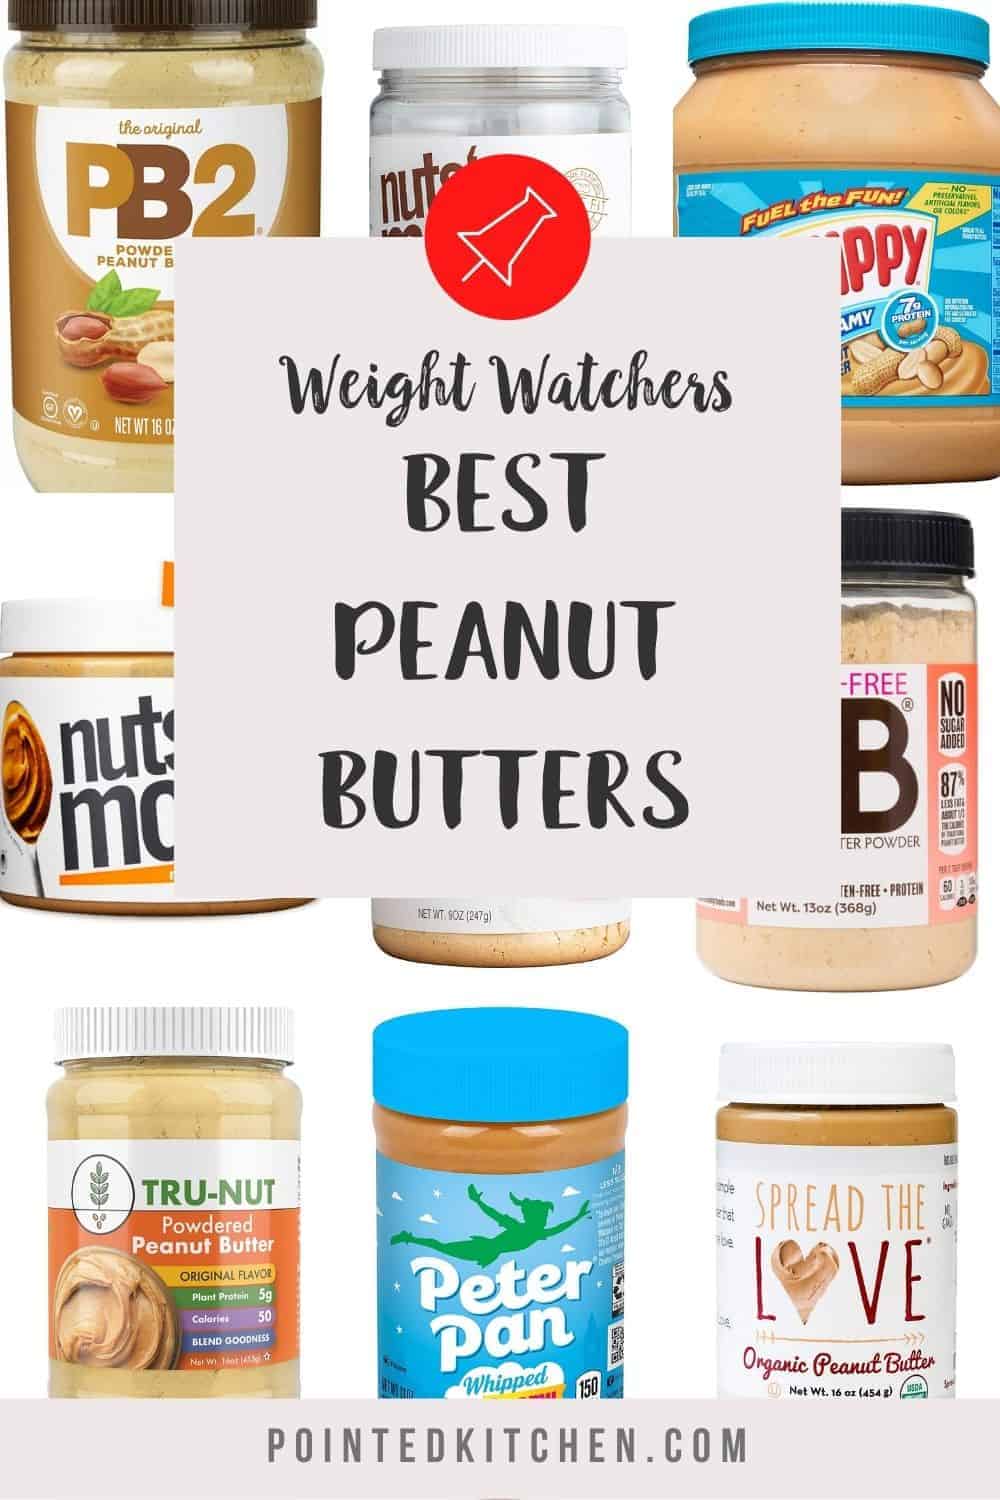 9 jars of peanut butter with a text overlay stating Weight Watchers Best Peanut Butters.